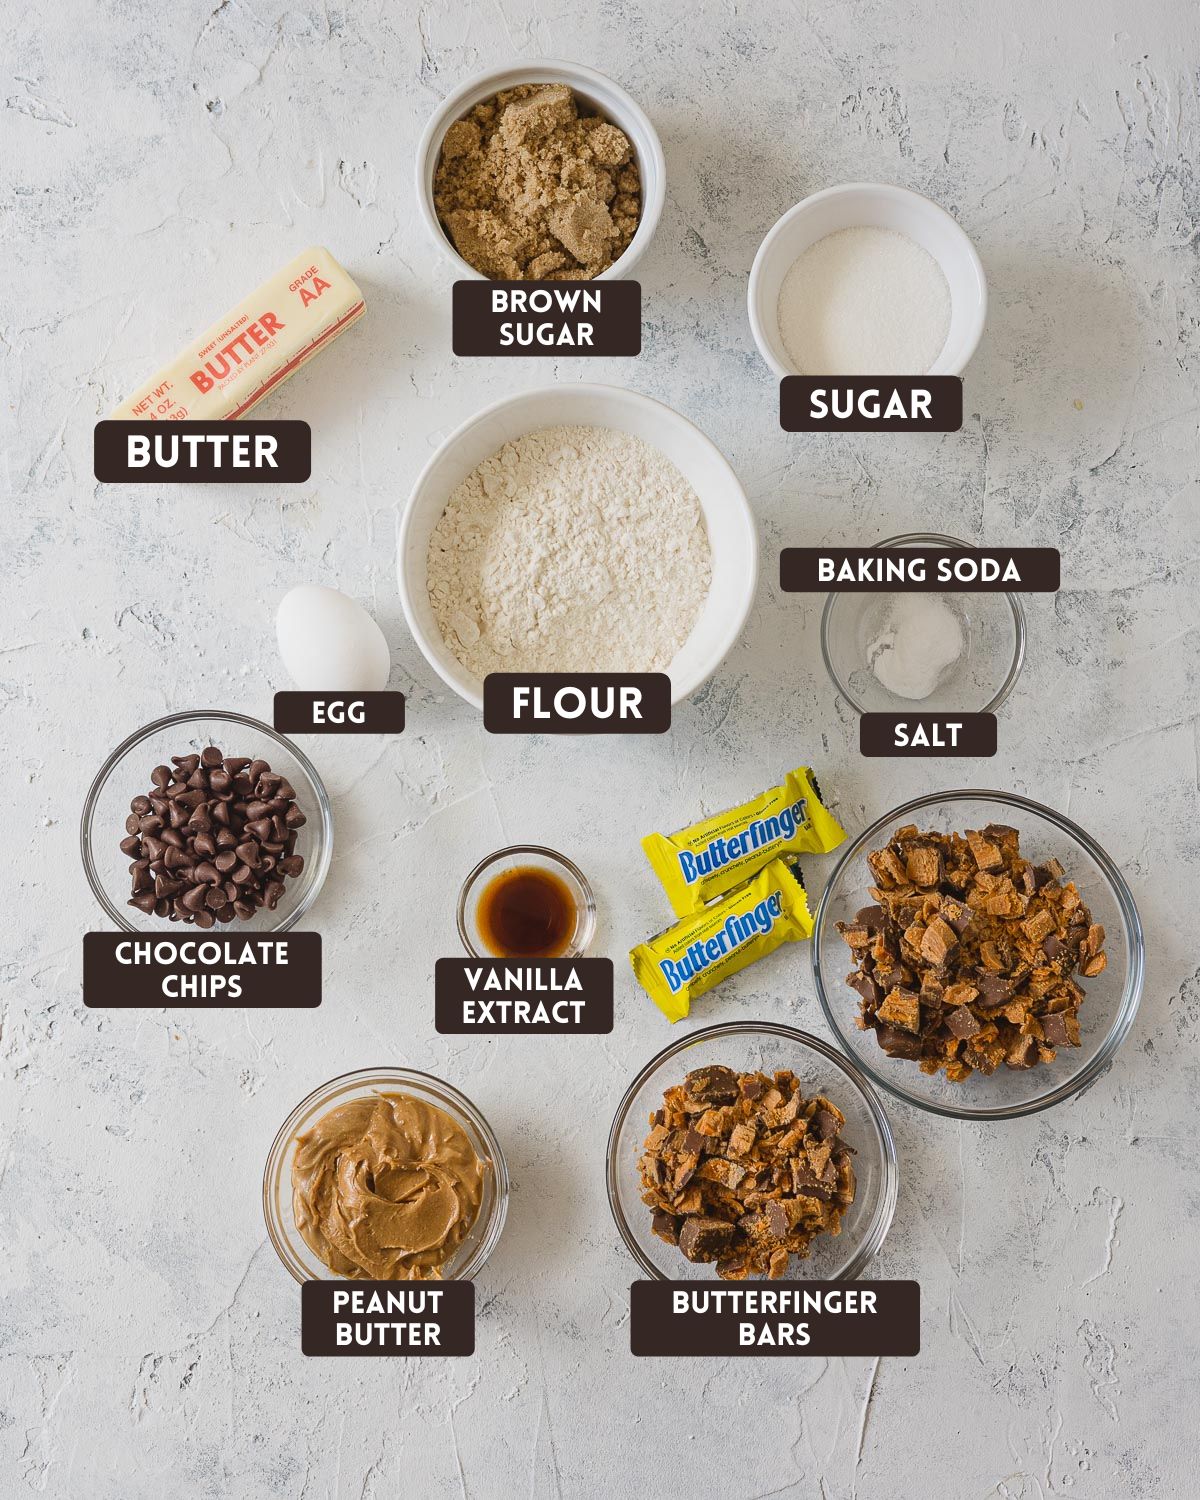 Labelled ingredients for Butterfinger cookies: butter, brown sugar, sugar, egg, flour, baking soda, salt, chocolate chips, vanilla extract, peanut butter, chopped Butterfinger bars.